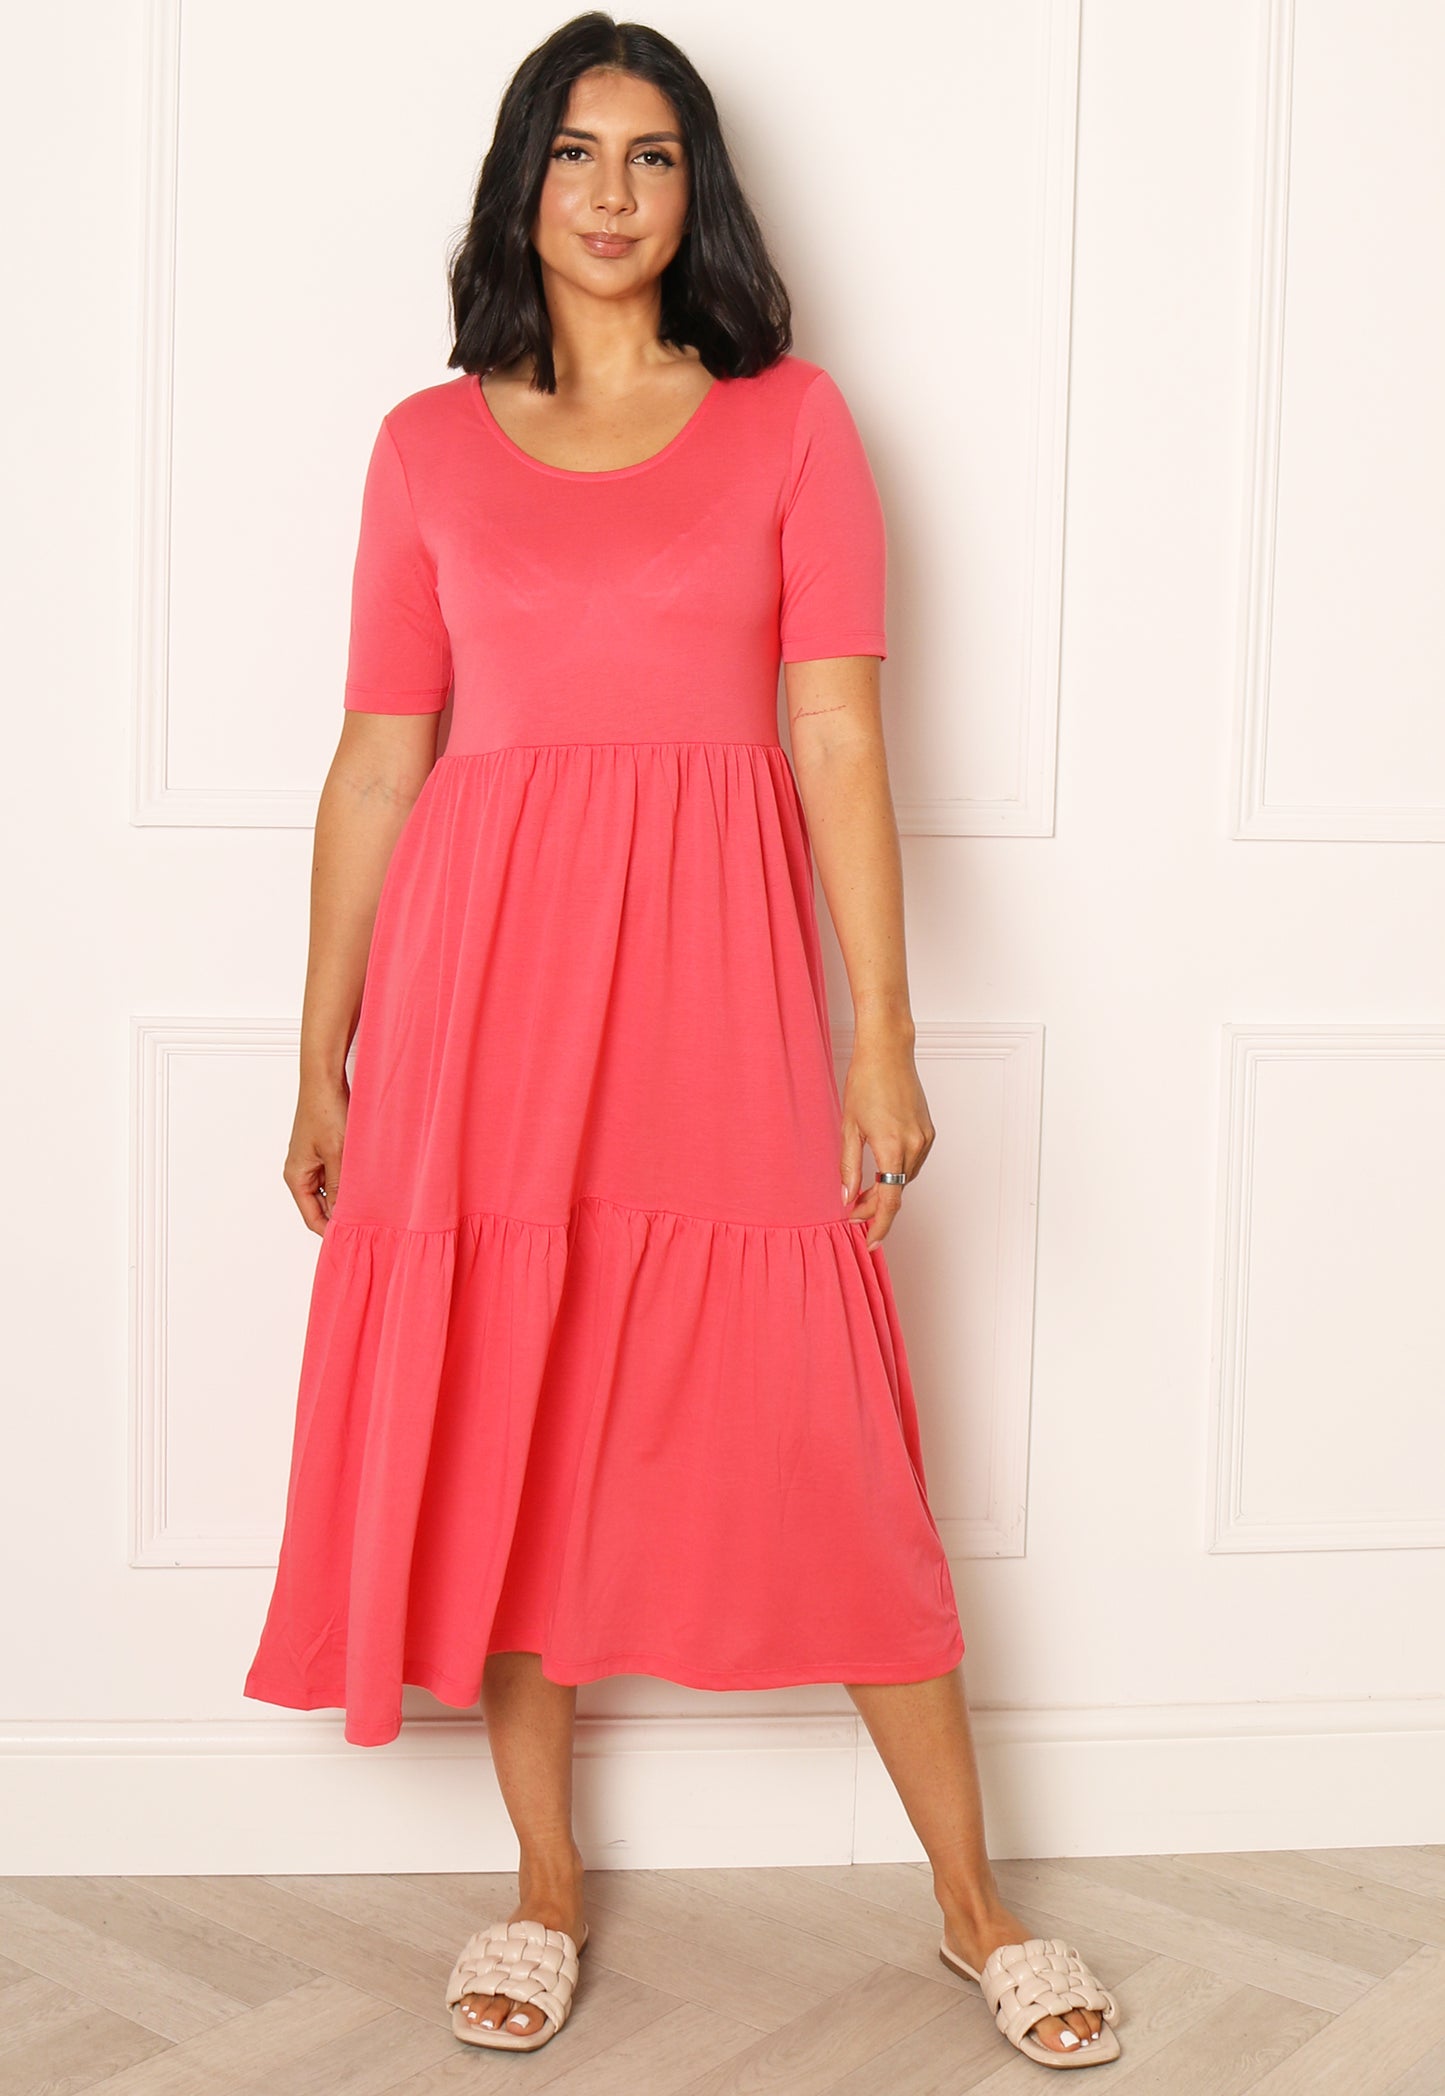 JDY Tiered Jersey Midi Summer Dress in Coral Pink - One Nation Clothing